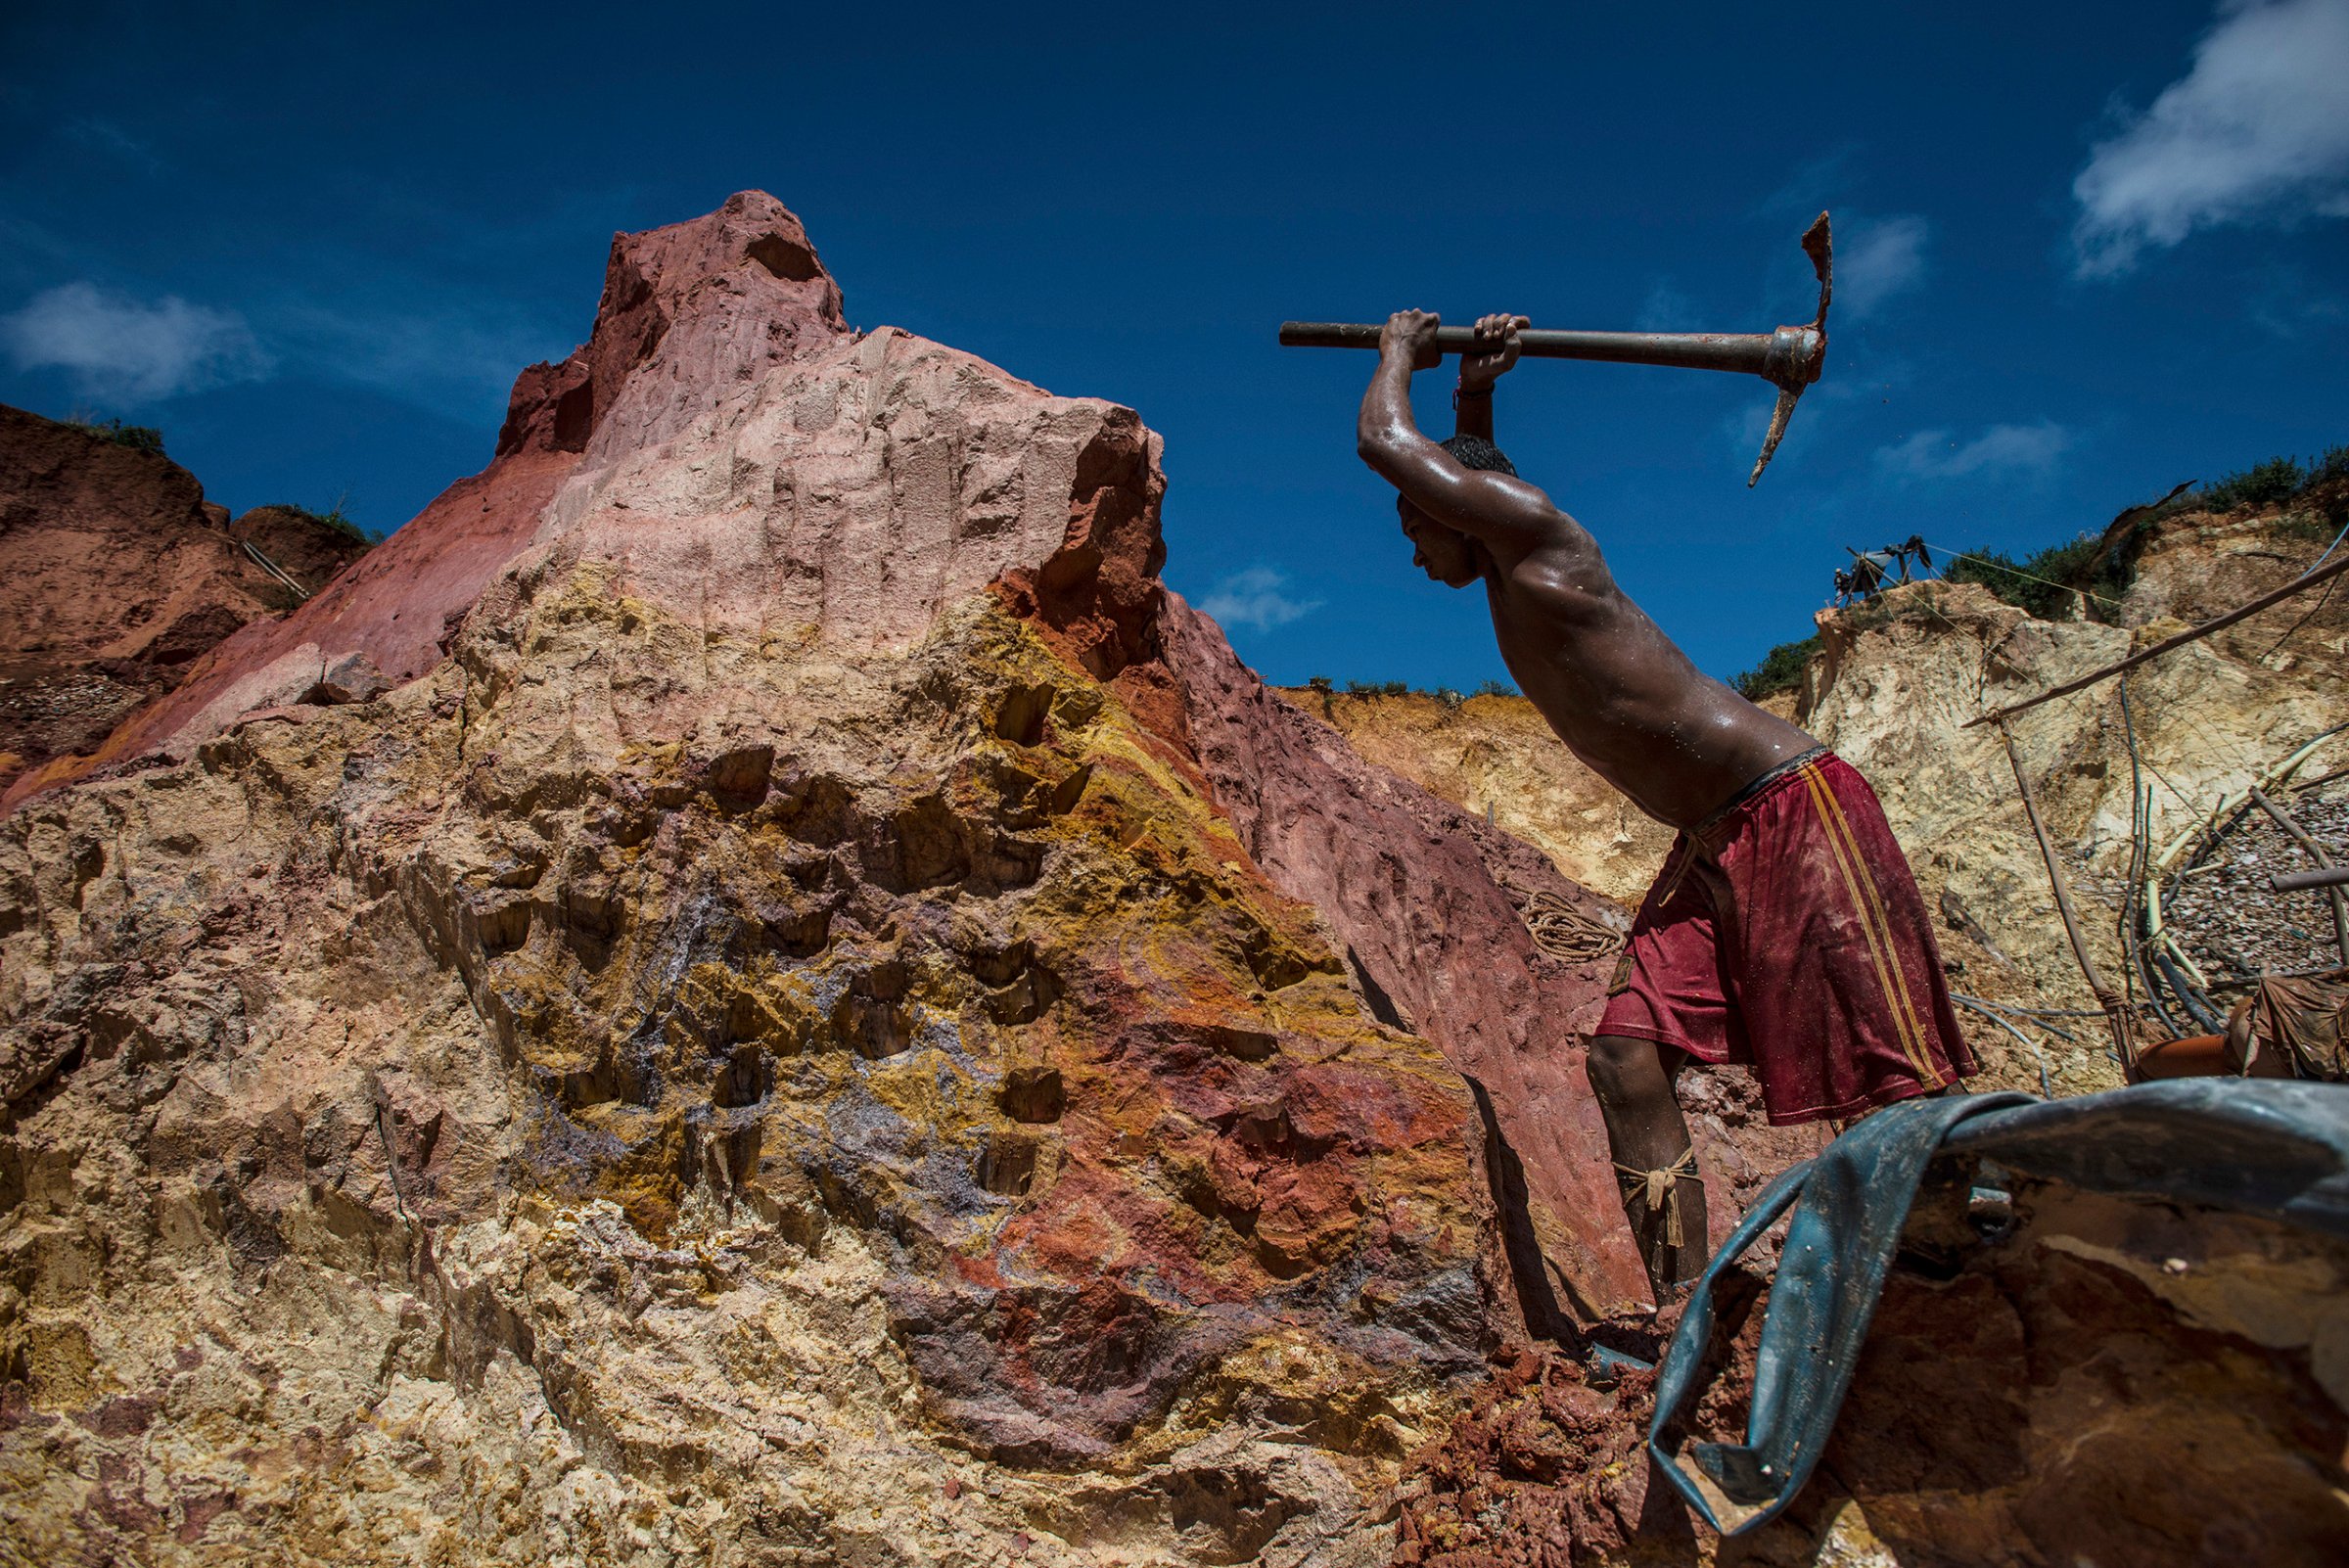 Carlos Freydel mines for gold at the illegal "Cuatro Muertos" mine outside Las Claritas, Venezuela, on July 20, 2016. The cratered economy has sent many Venezuelans to work in the country's illegal gold mines scattered across the jungle, where the primitive conditions have seen malaria return with a vengeance.